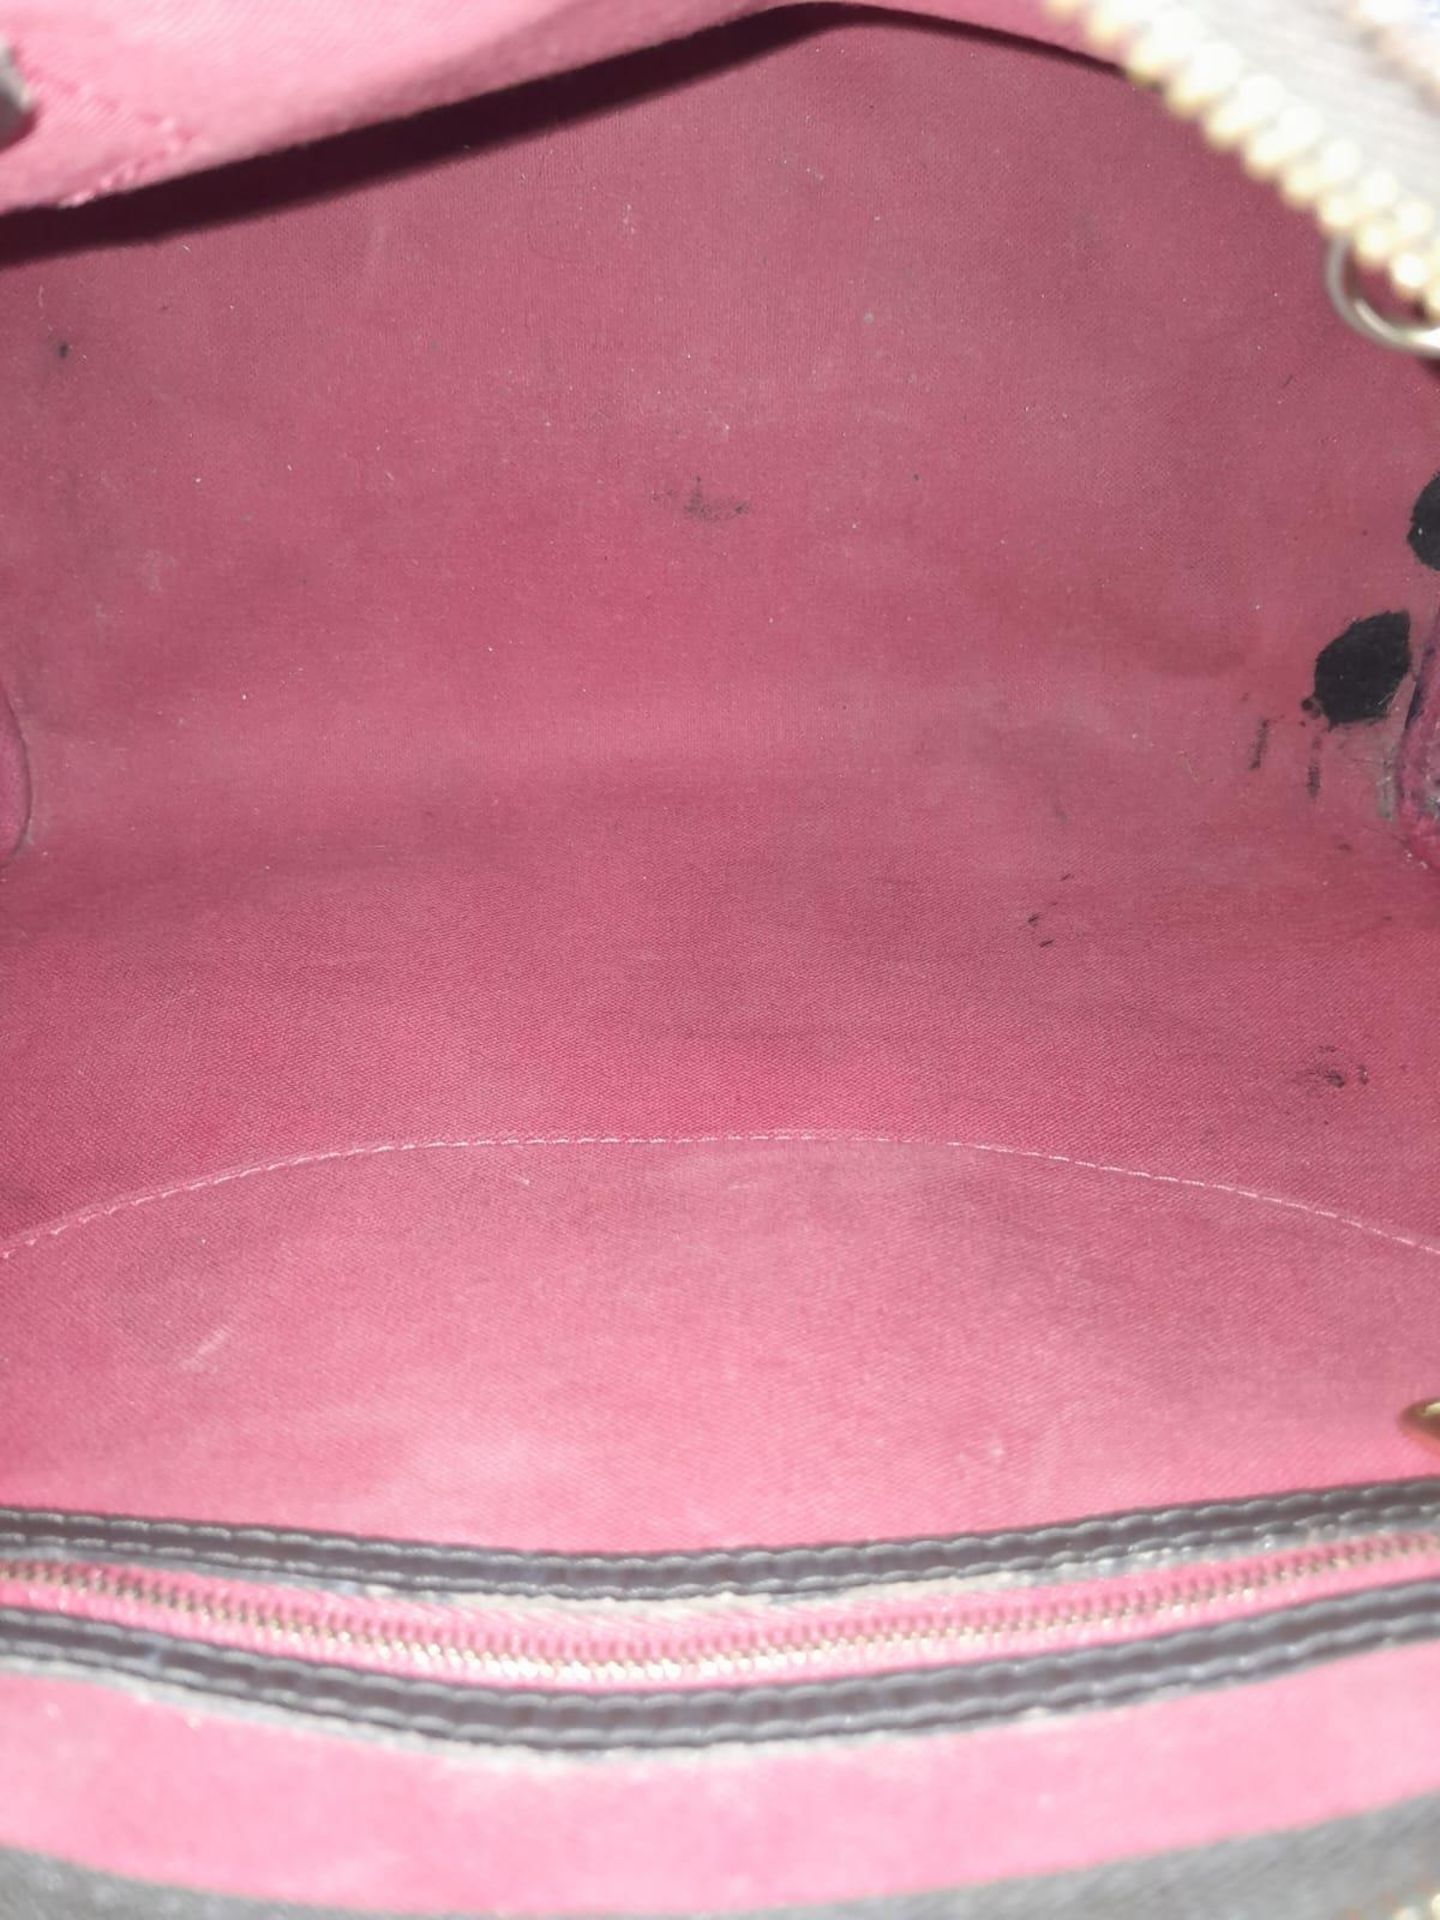 A Louis Vuitton Speedy Bag. Checked LV canvas exterior. Red textile interior. Comes with dust cover, - Image 5 of 12